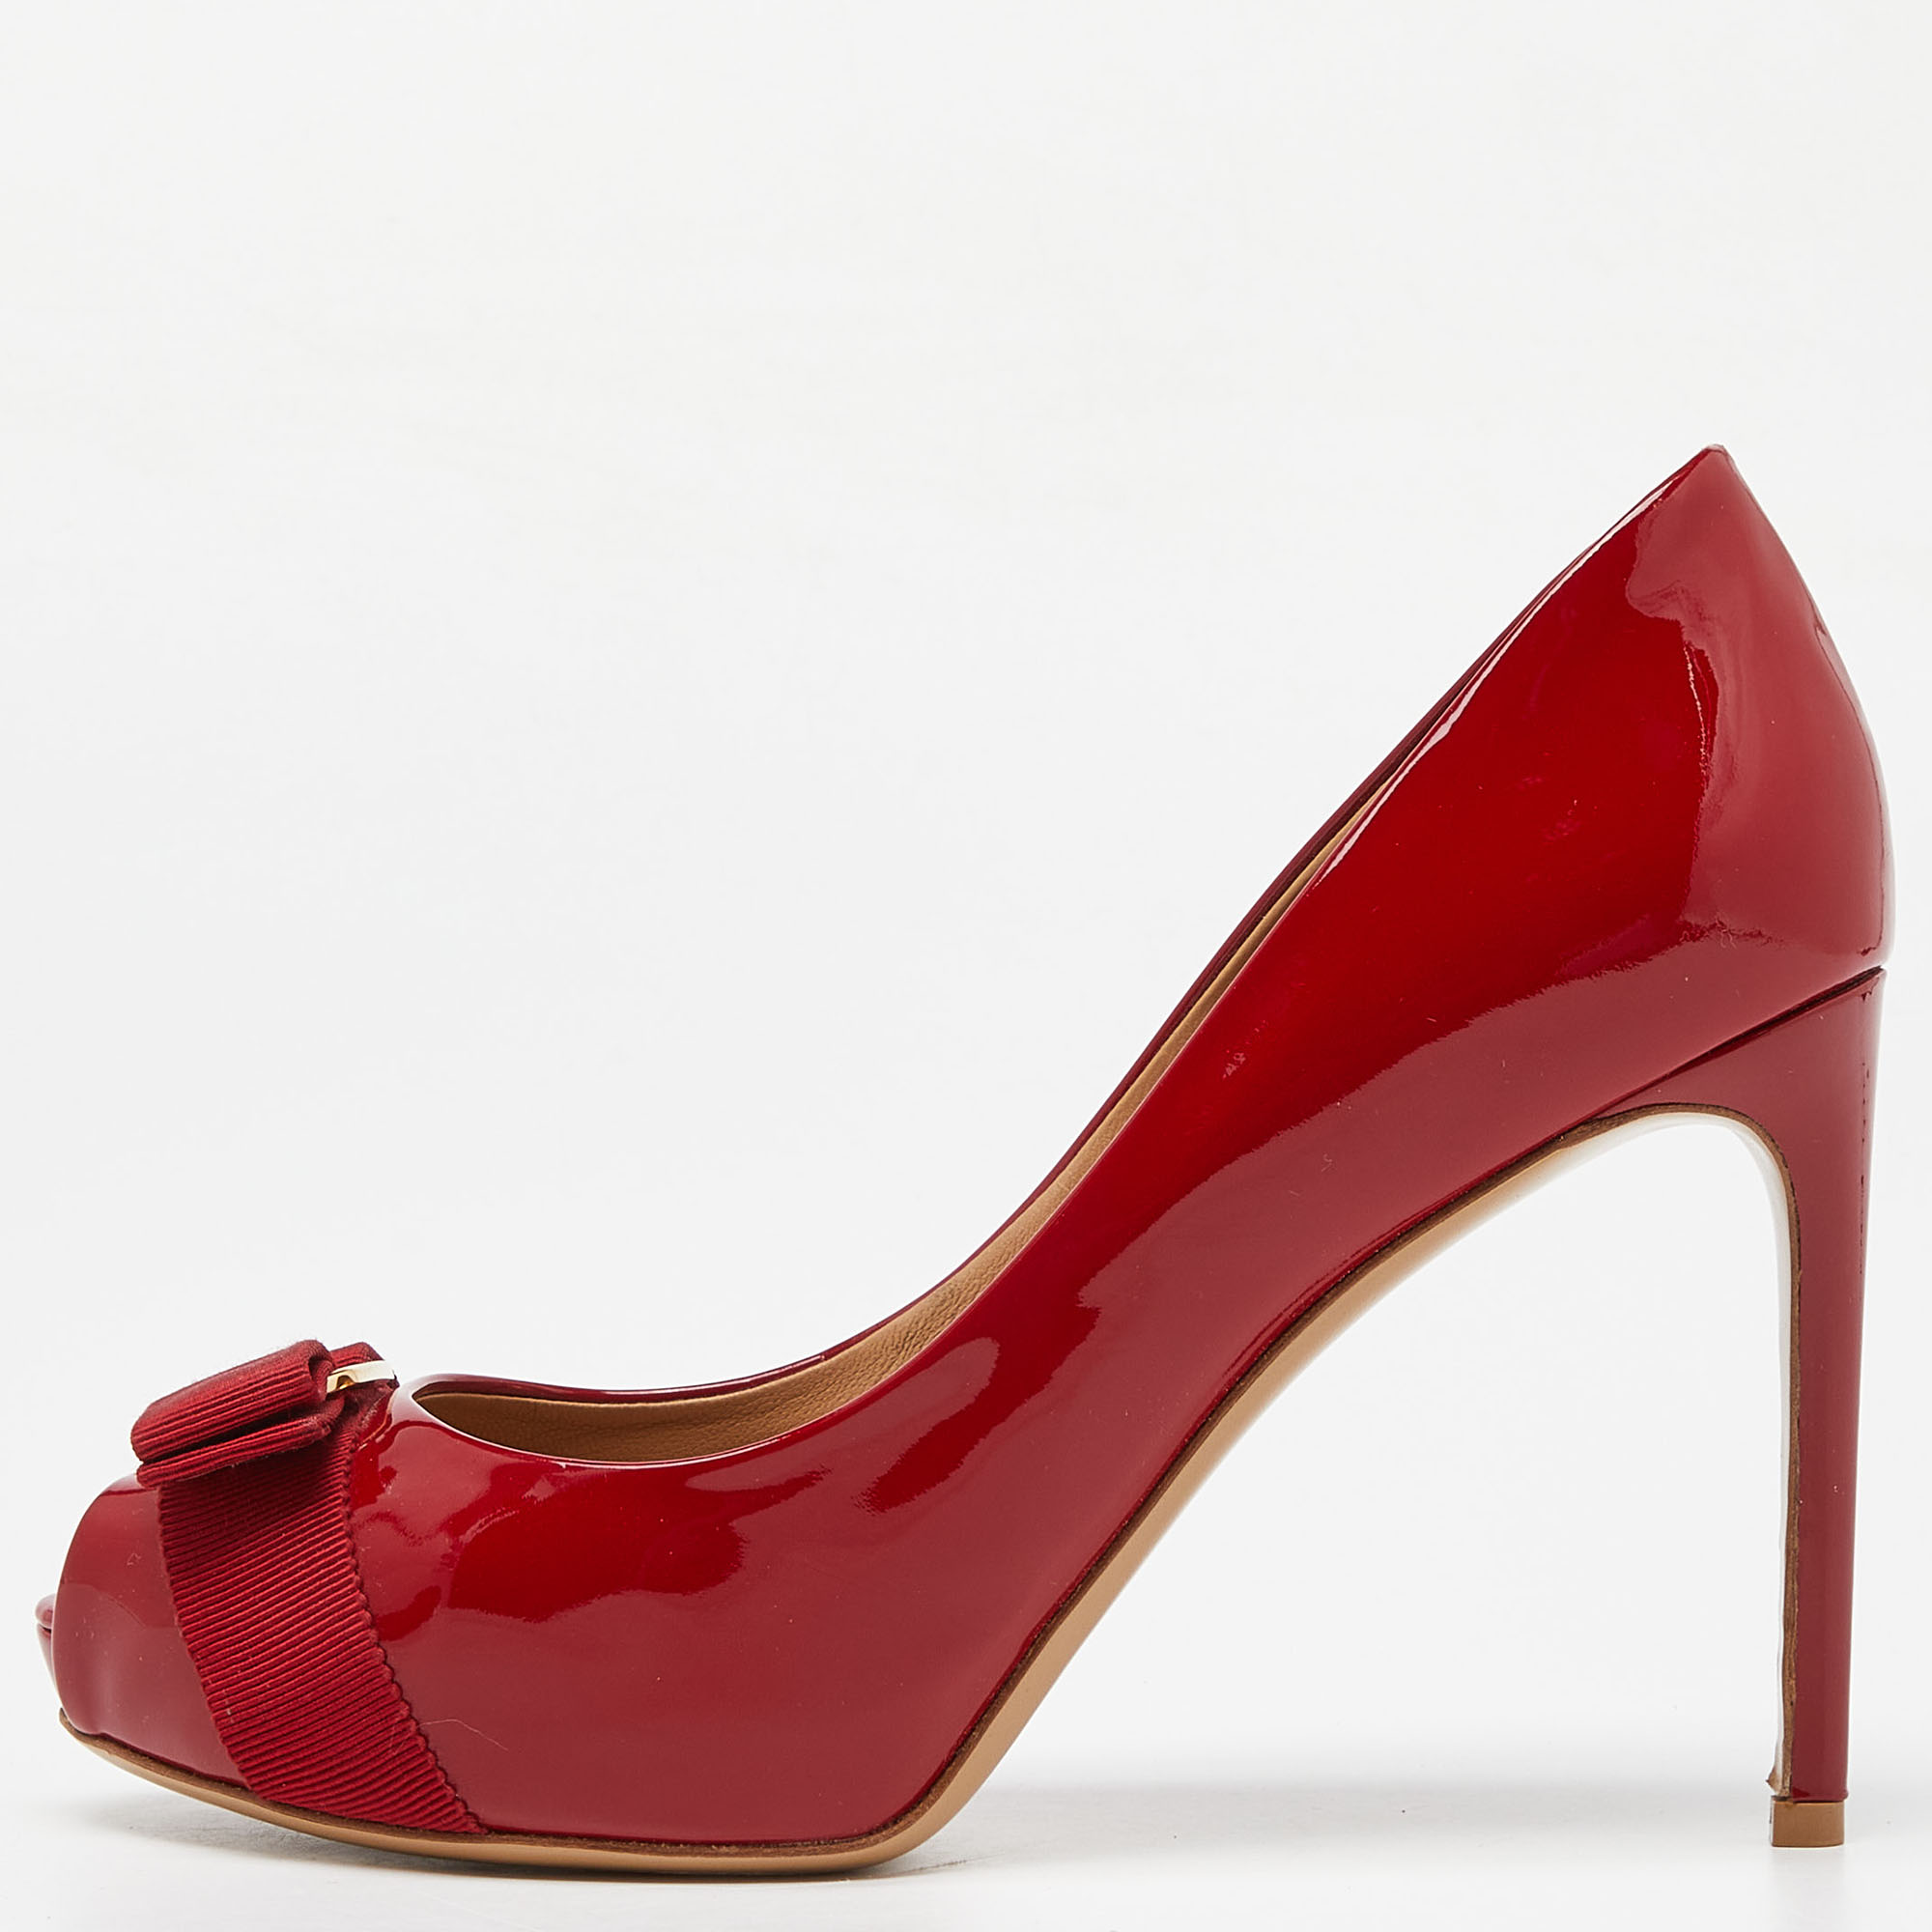 Pre-owned Ferragamo Red Patent Leather Vara Bow Peep Toe Platform Pumps Size 38.5